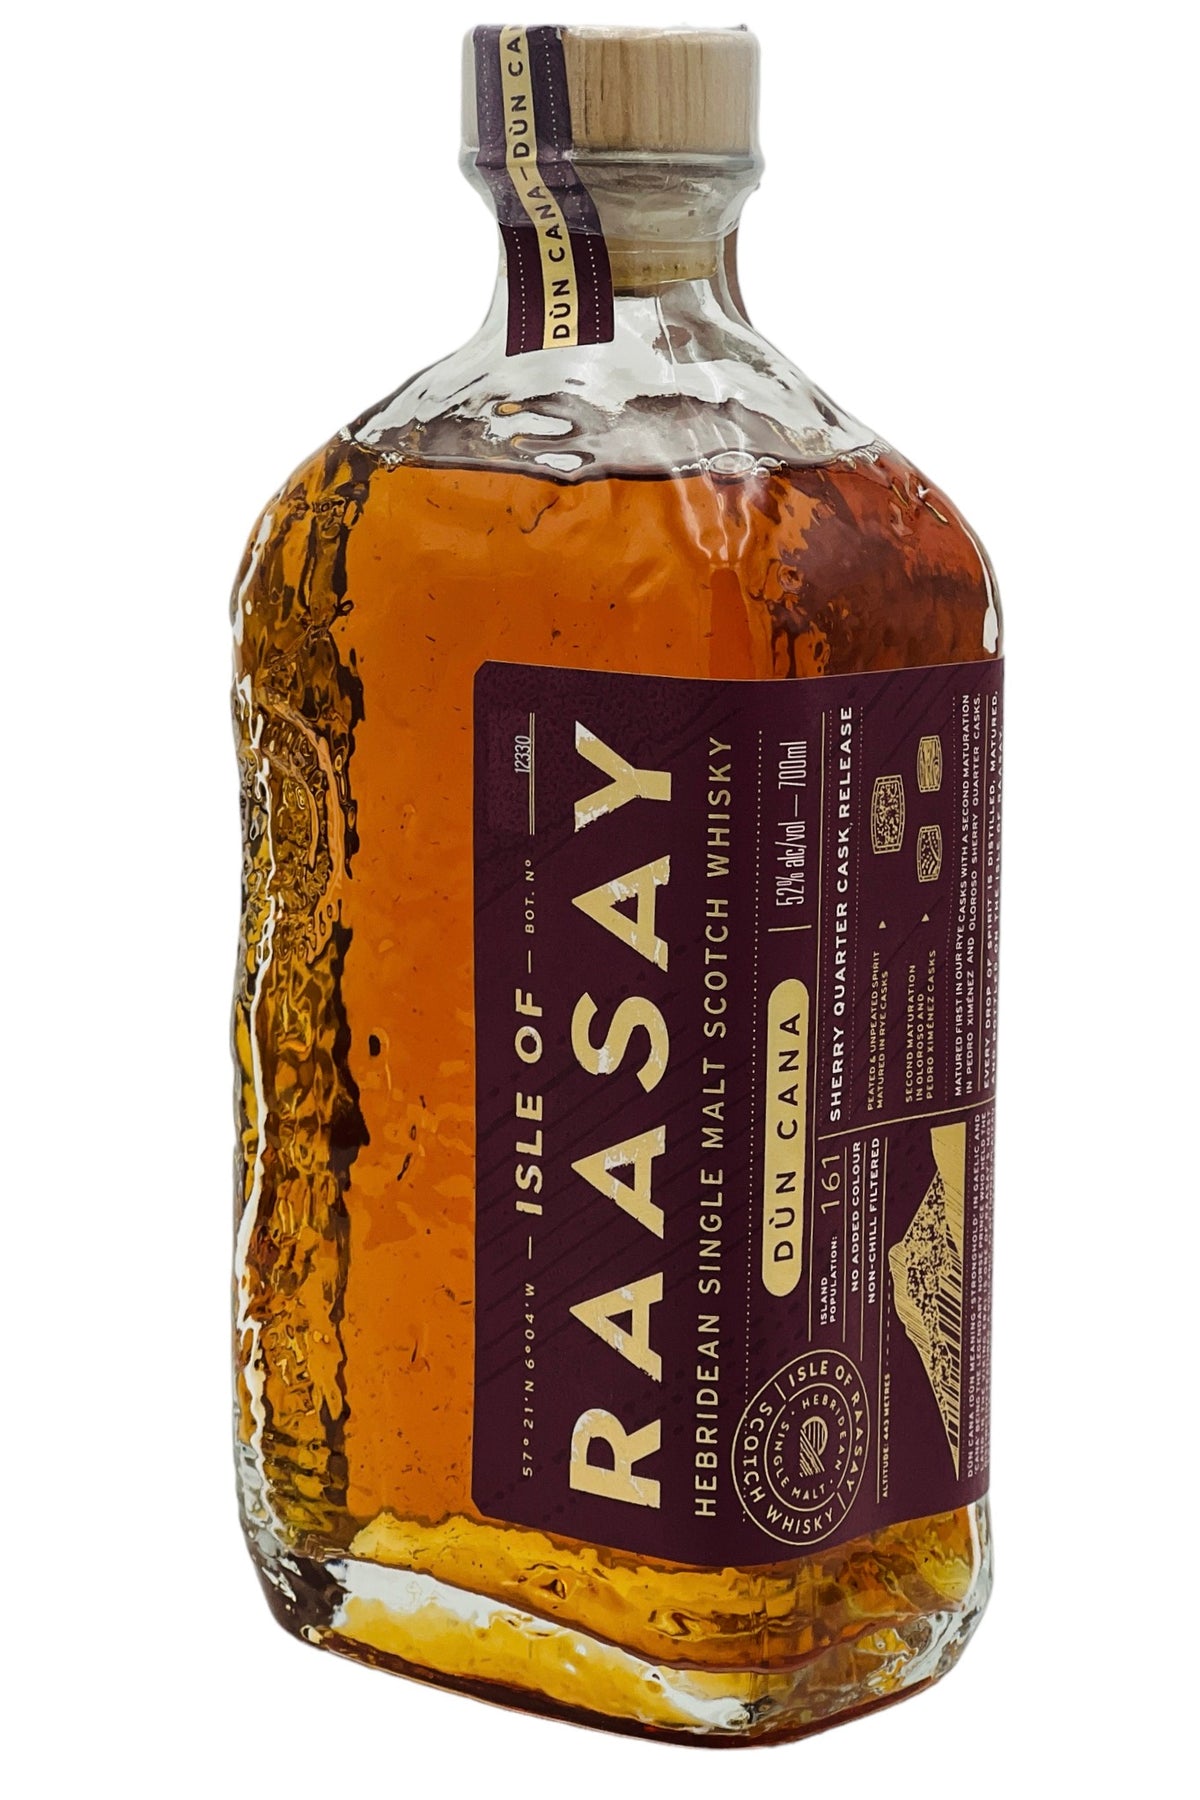 Isle of Raasay &quot;Dun Cana&quot; (Sherry Cask) First Edition Single Malt Scotch Whisky